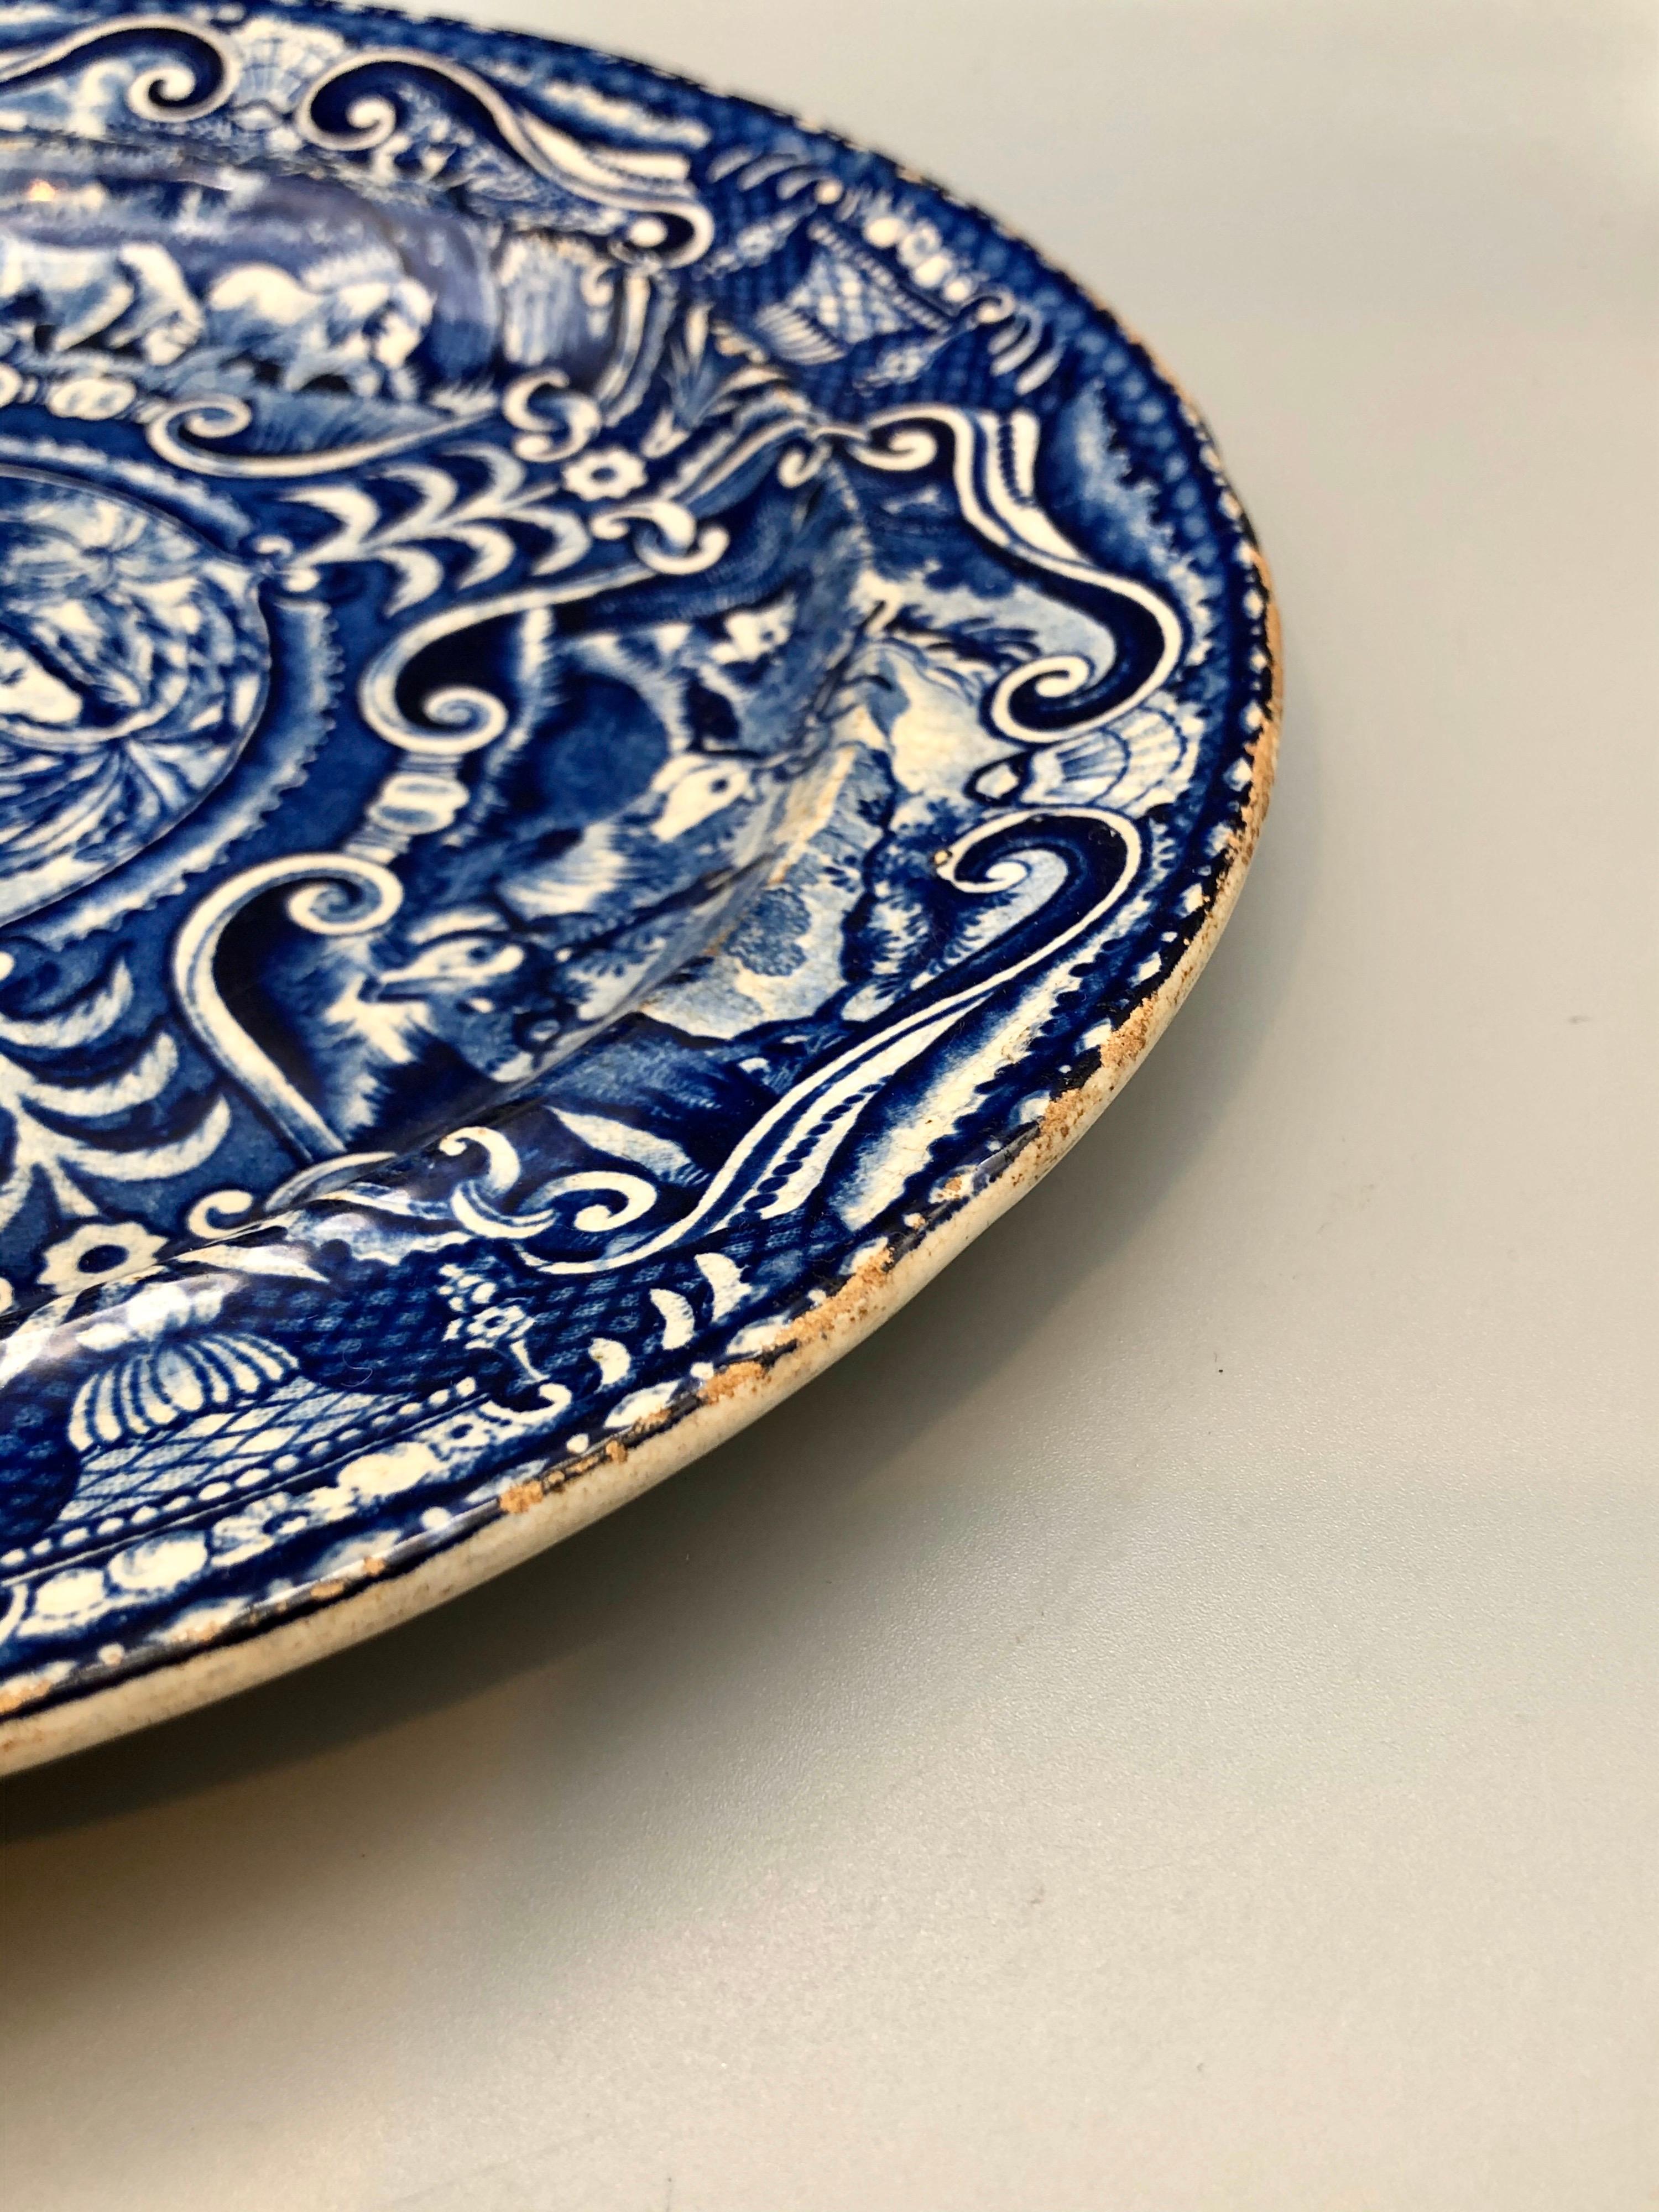 British Early 1800s Quadruped Plate Lion Pattern Cobalt Blue and White For Sale